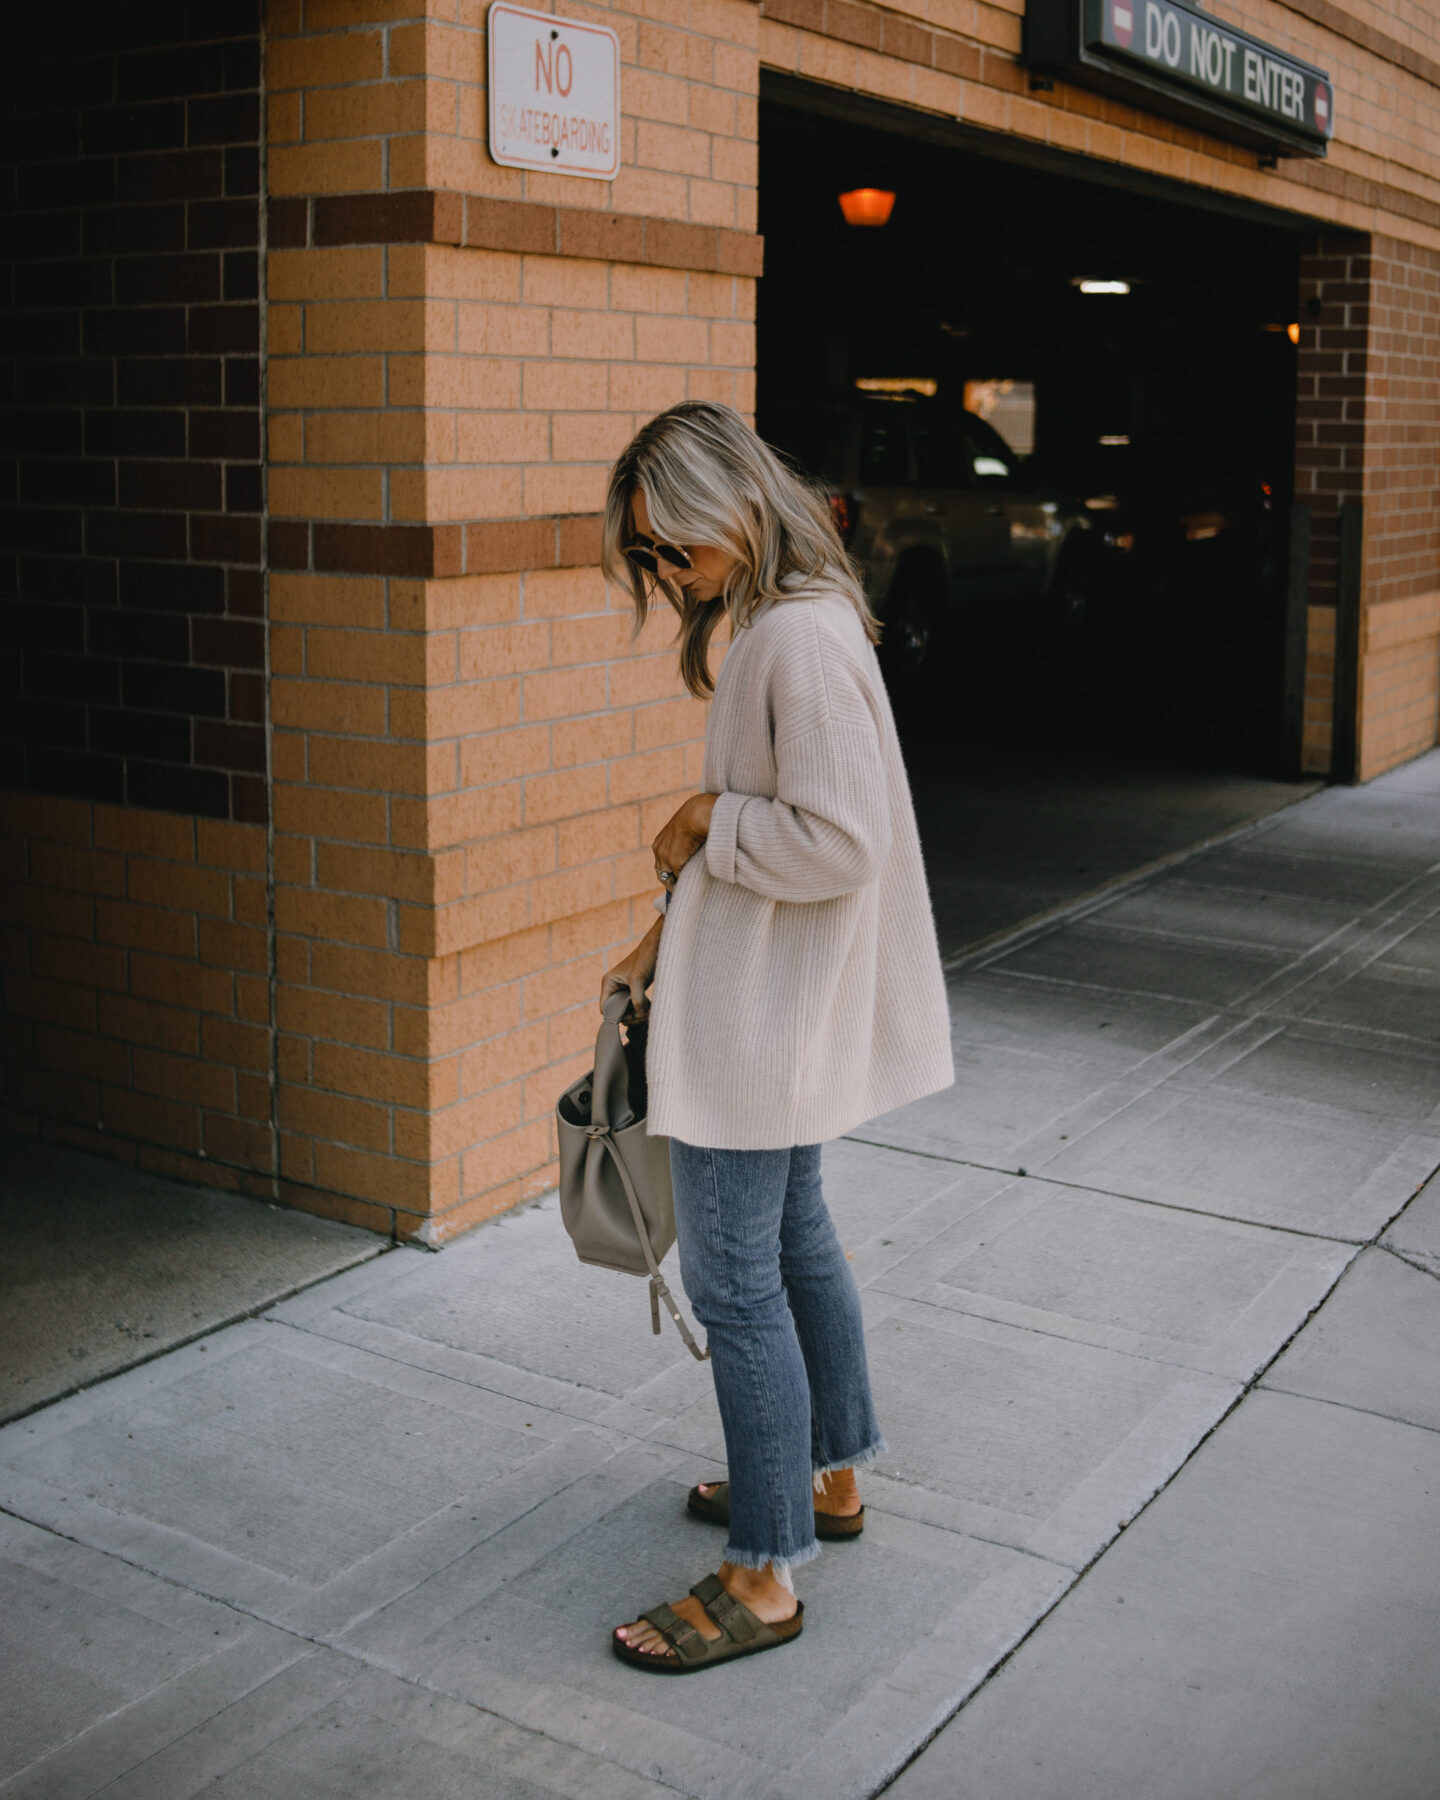 karin emily wearing the jenni kayne cashmere cocoon cardigan with a cream tee and madewell perfect vintage jeans, a pair of birkenstock arizonas, and a pair of clear sunglasses